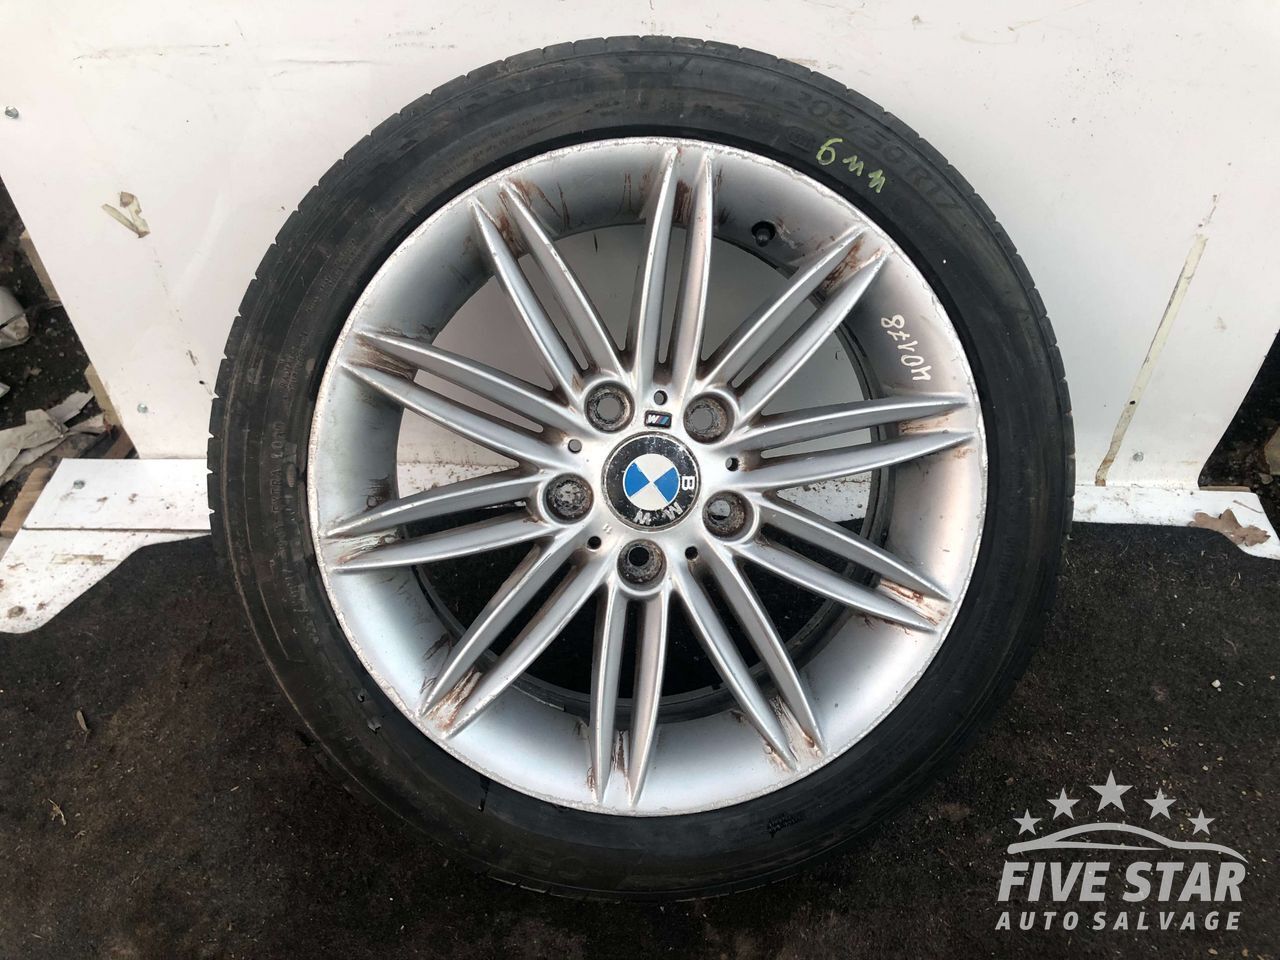 1999 BMW 3 Series 318i (97-01) Saloon 4/5dr R17 Alloy Wheel With Tire 8036938